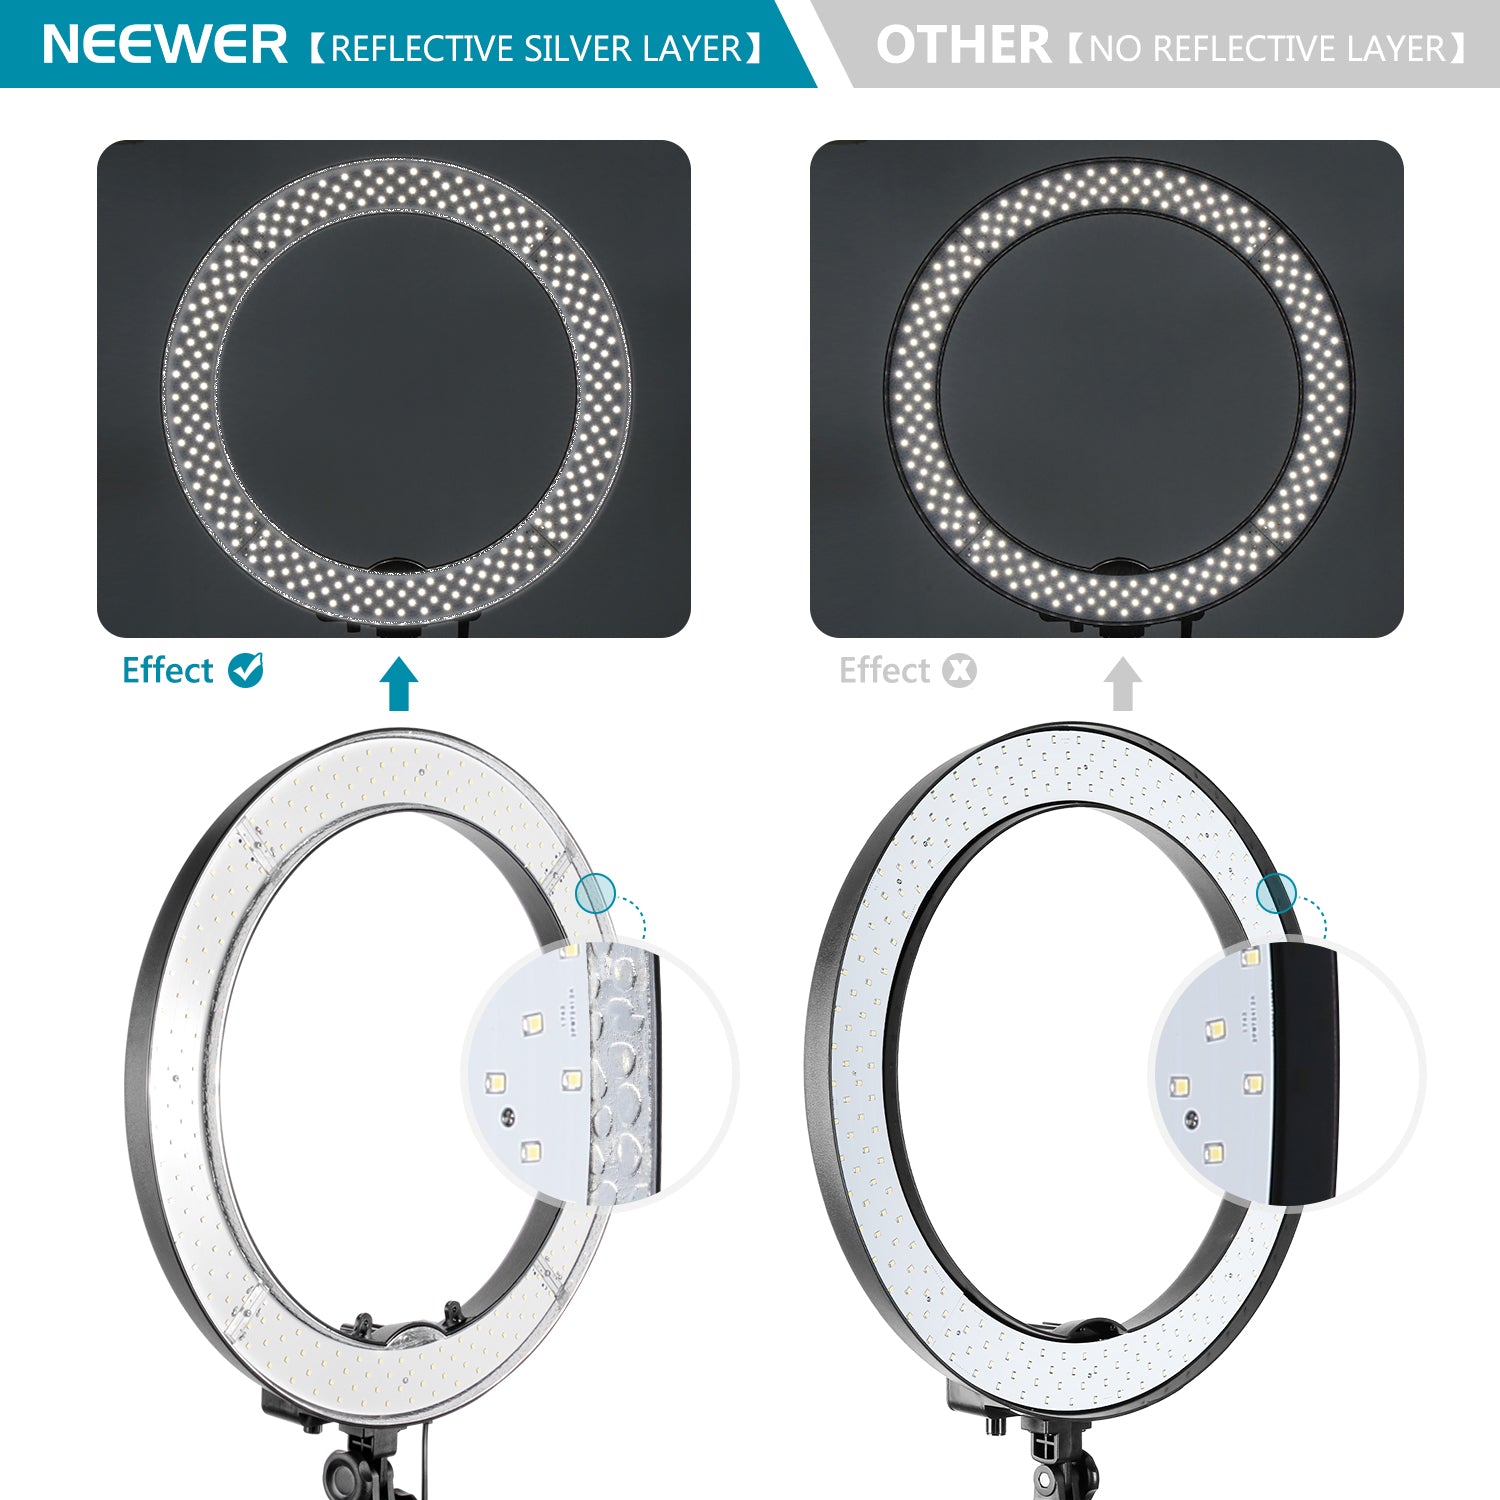 Neewer Pro 18" LED Ring Light kit, with Foldable Light Stand and Carrying Bag